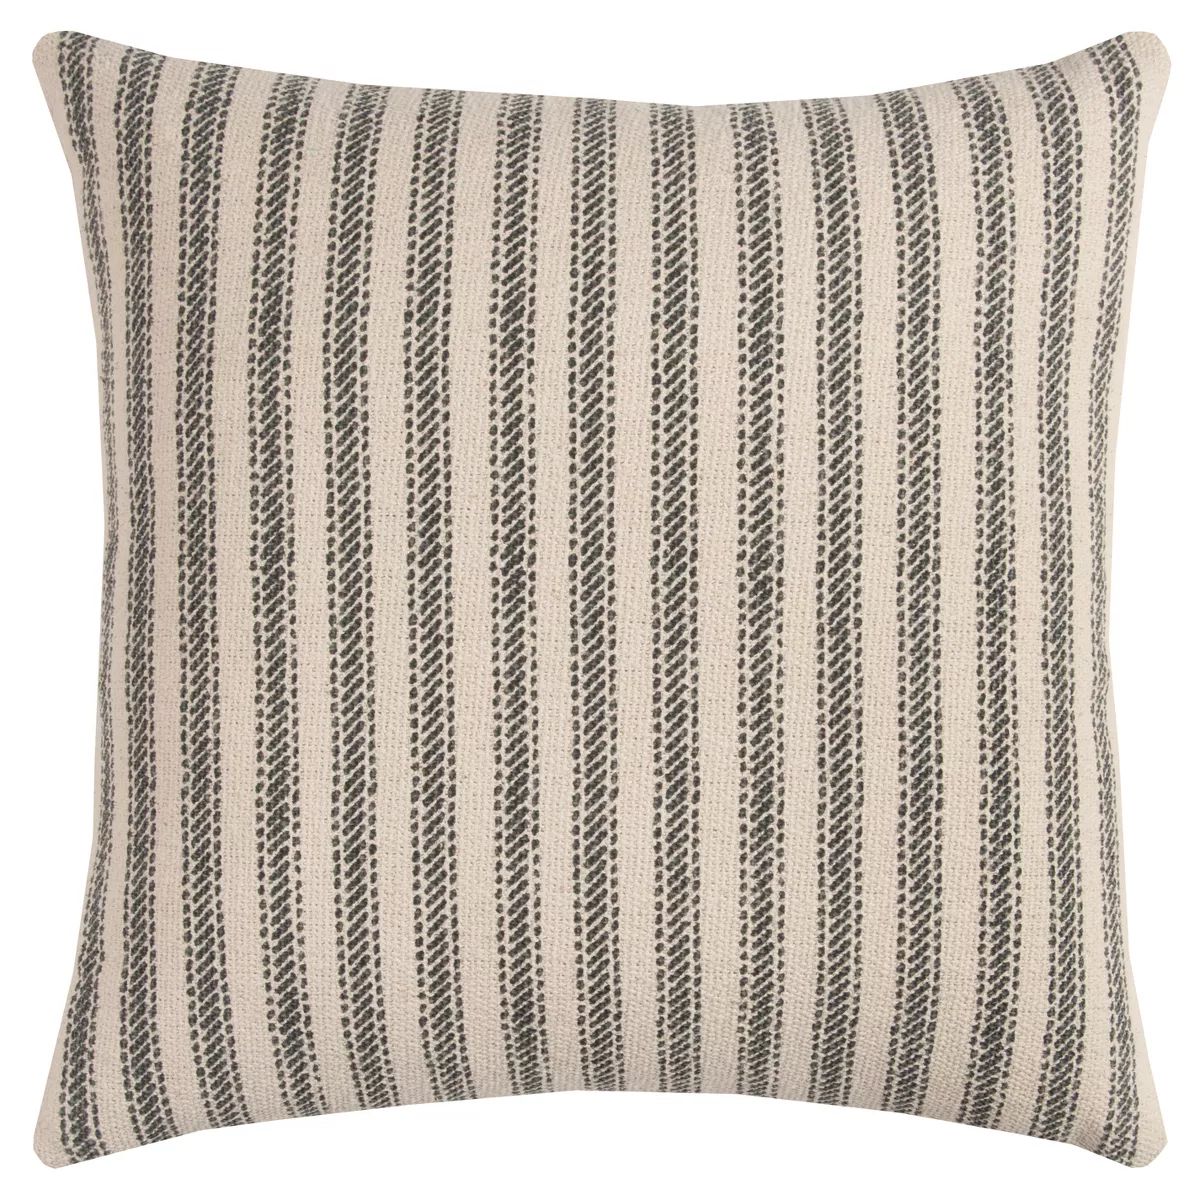 20"x20" Oversize Ticking Striped Square Throw Pillow - Rizzy Home | Target